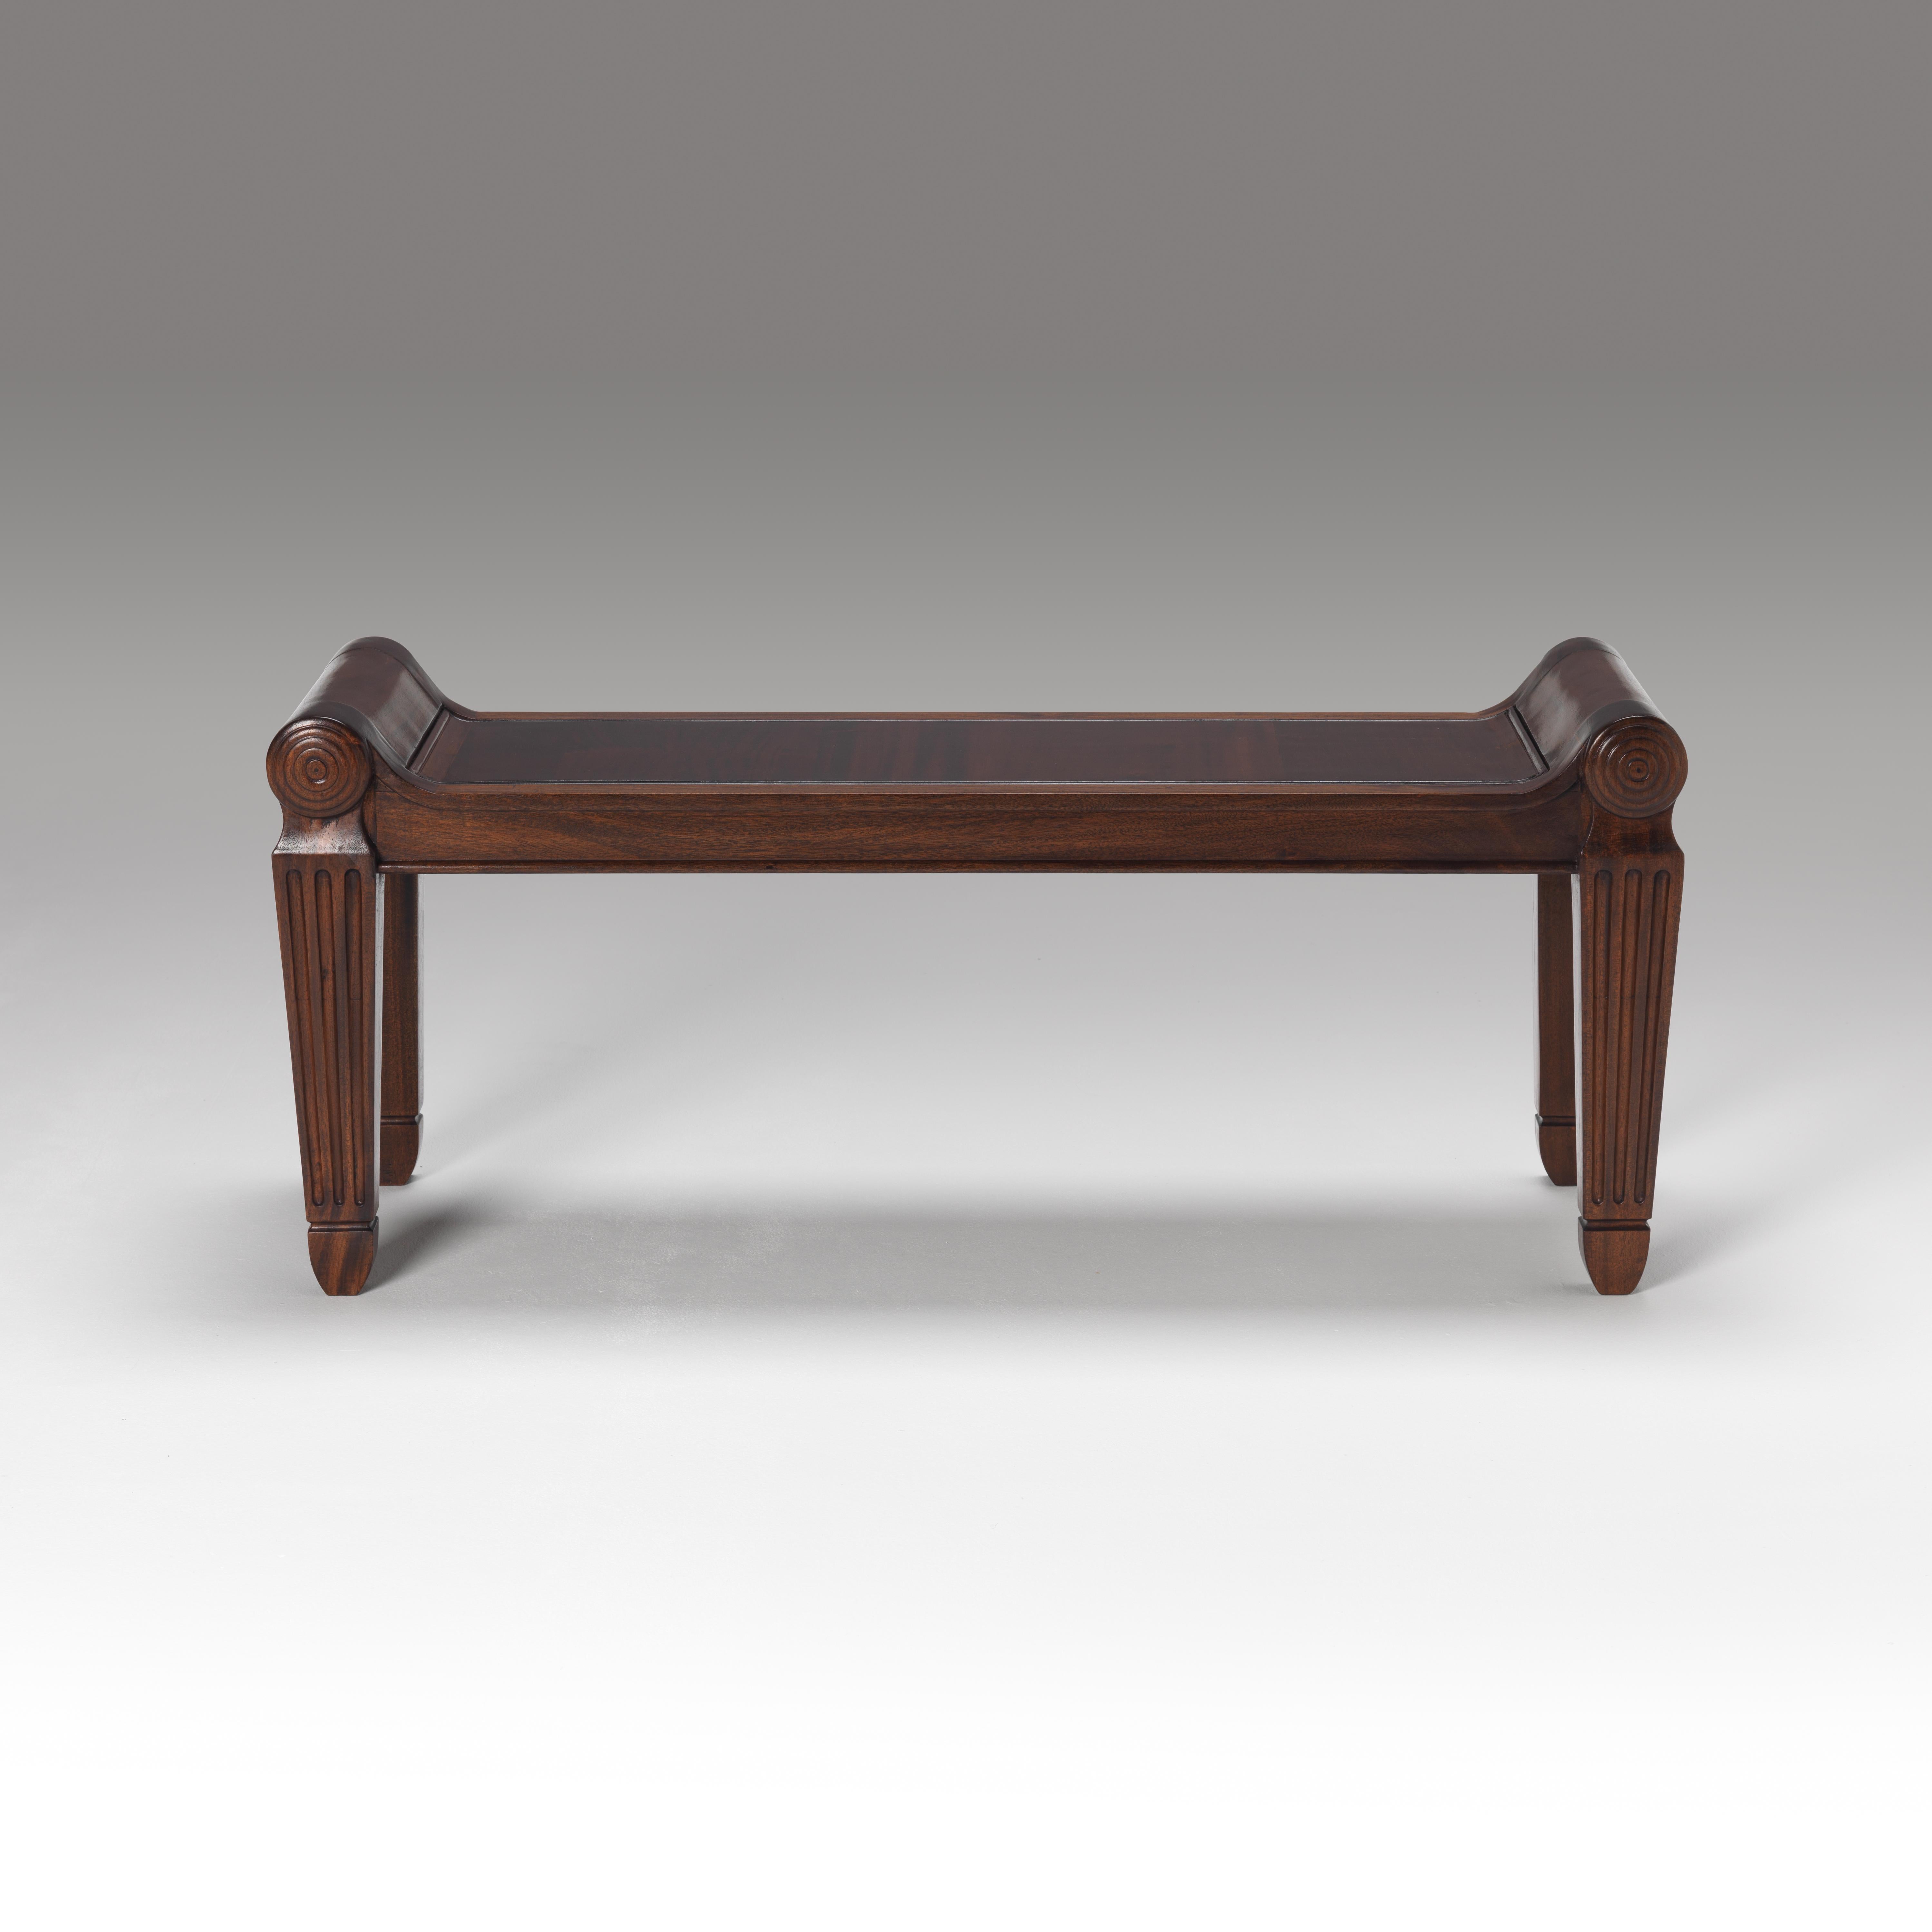 A fine regency design Grand Tour inspired mahogany bench/hall seat of elegant proportions. Almost certainly designed by renowned Charles Heathcote Tatham.

Bespoke sizing, design adaptations and finishing available.

We are currently working to